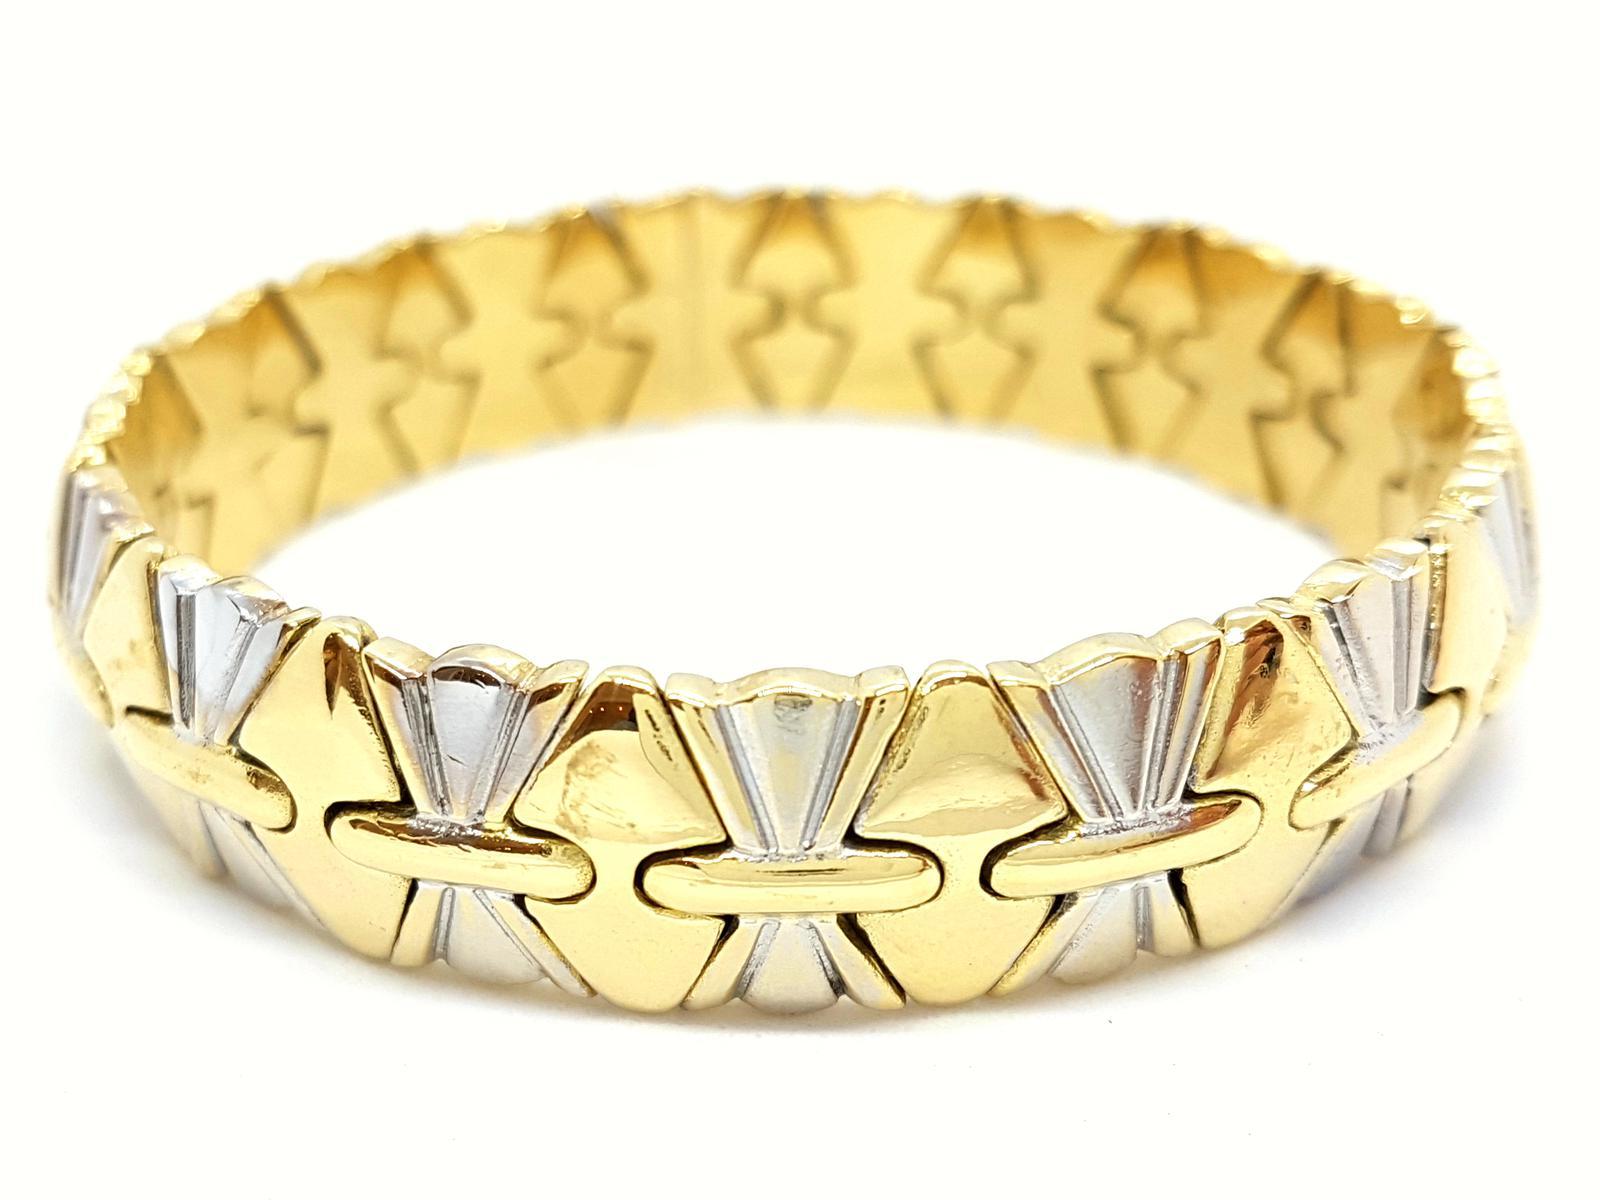 Bracelet Yellow Gold and White 750 mils (18 carats). rigid. semi-open. size: 19 cm. width: 1.2 cm. inner diameter 5.1 cm. weight: 58.93 g. punched. excellent condition
